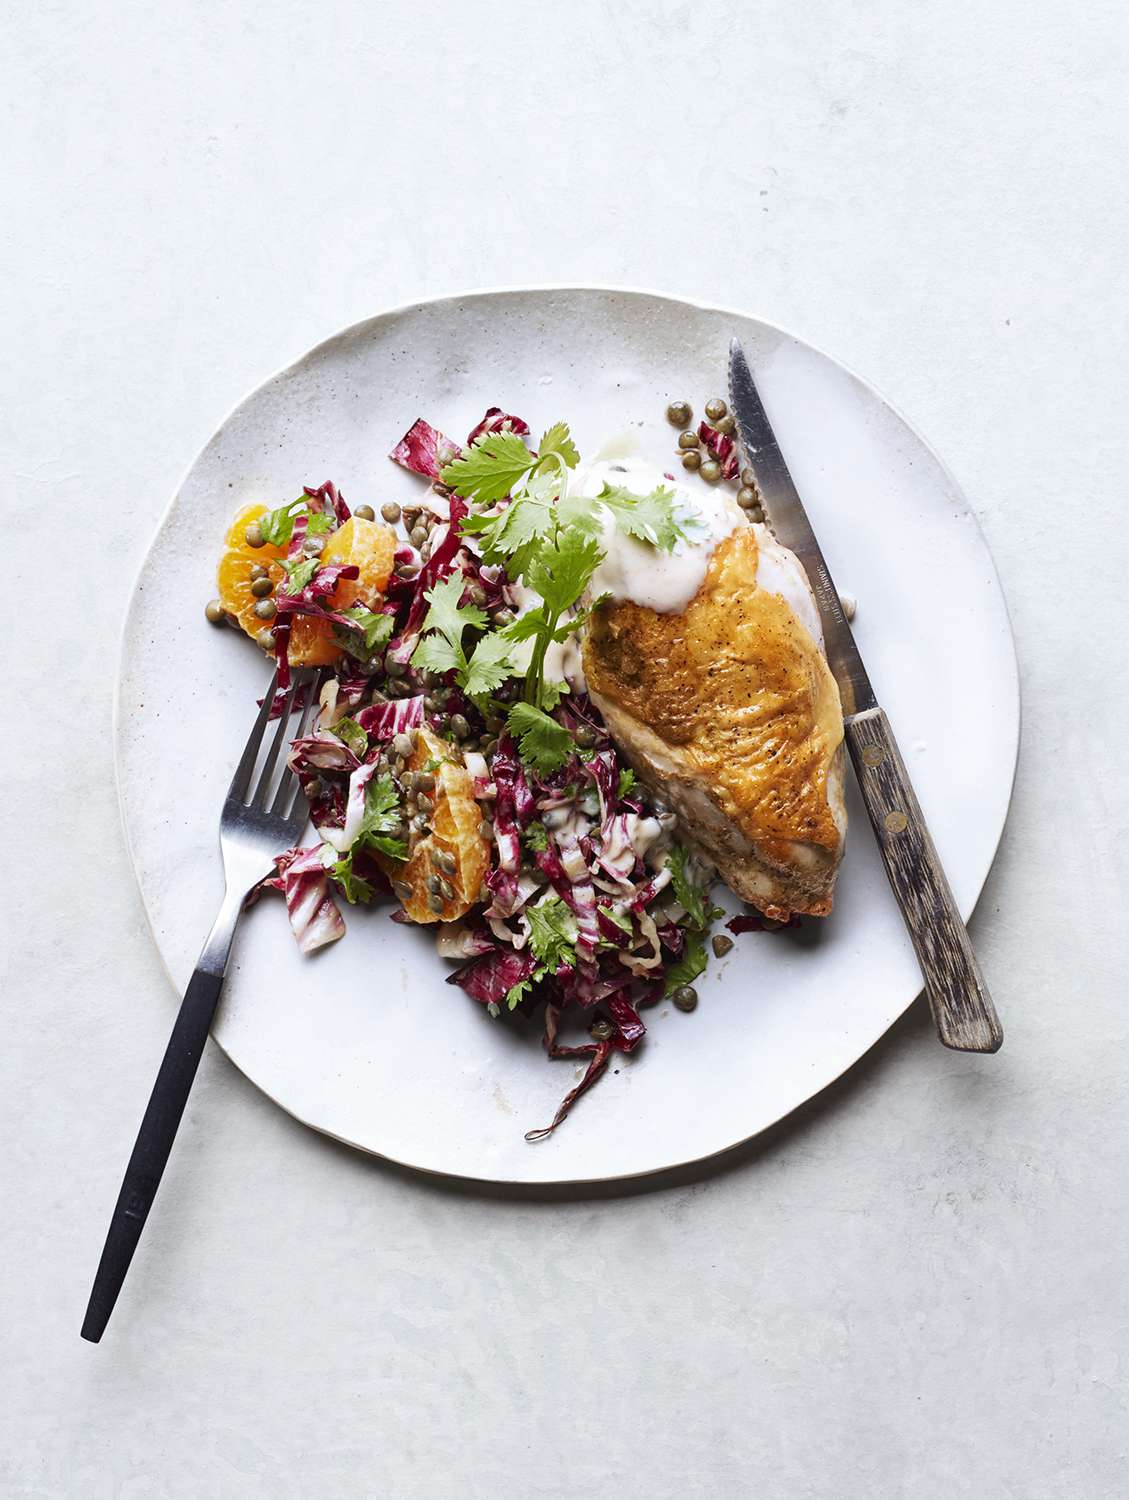 Spiced Chicken Breasts With Lentil and Radicchio Salad